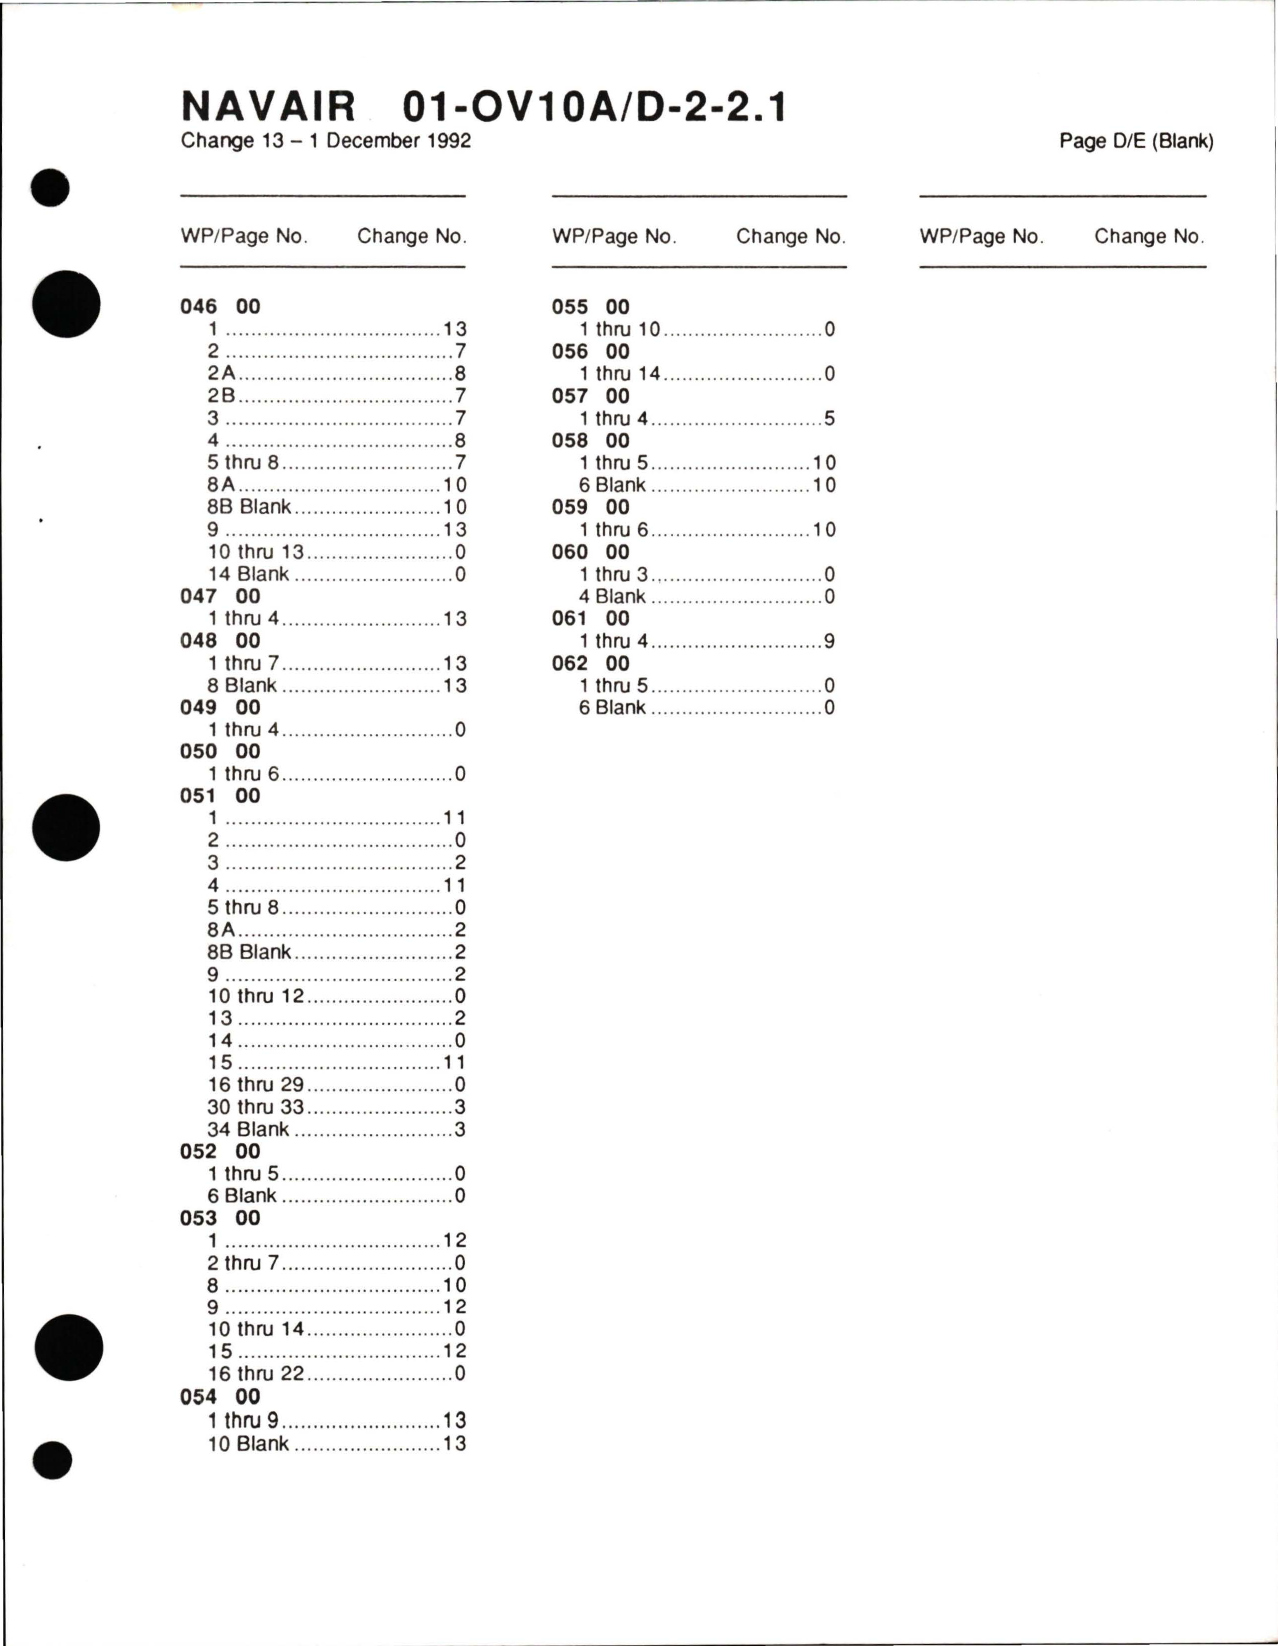 Sample page 5 from AirCorps Library document: Organizational Maintenance with Illustrated Parts Breakdown for Airframe Systems on OV-10A/D